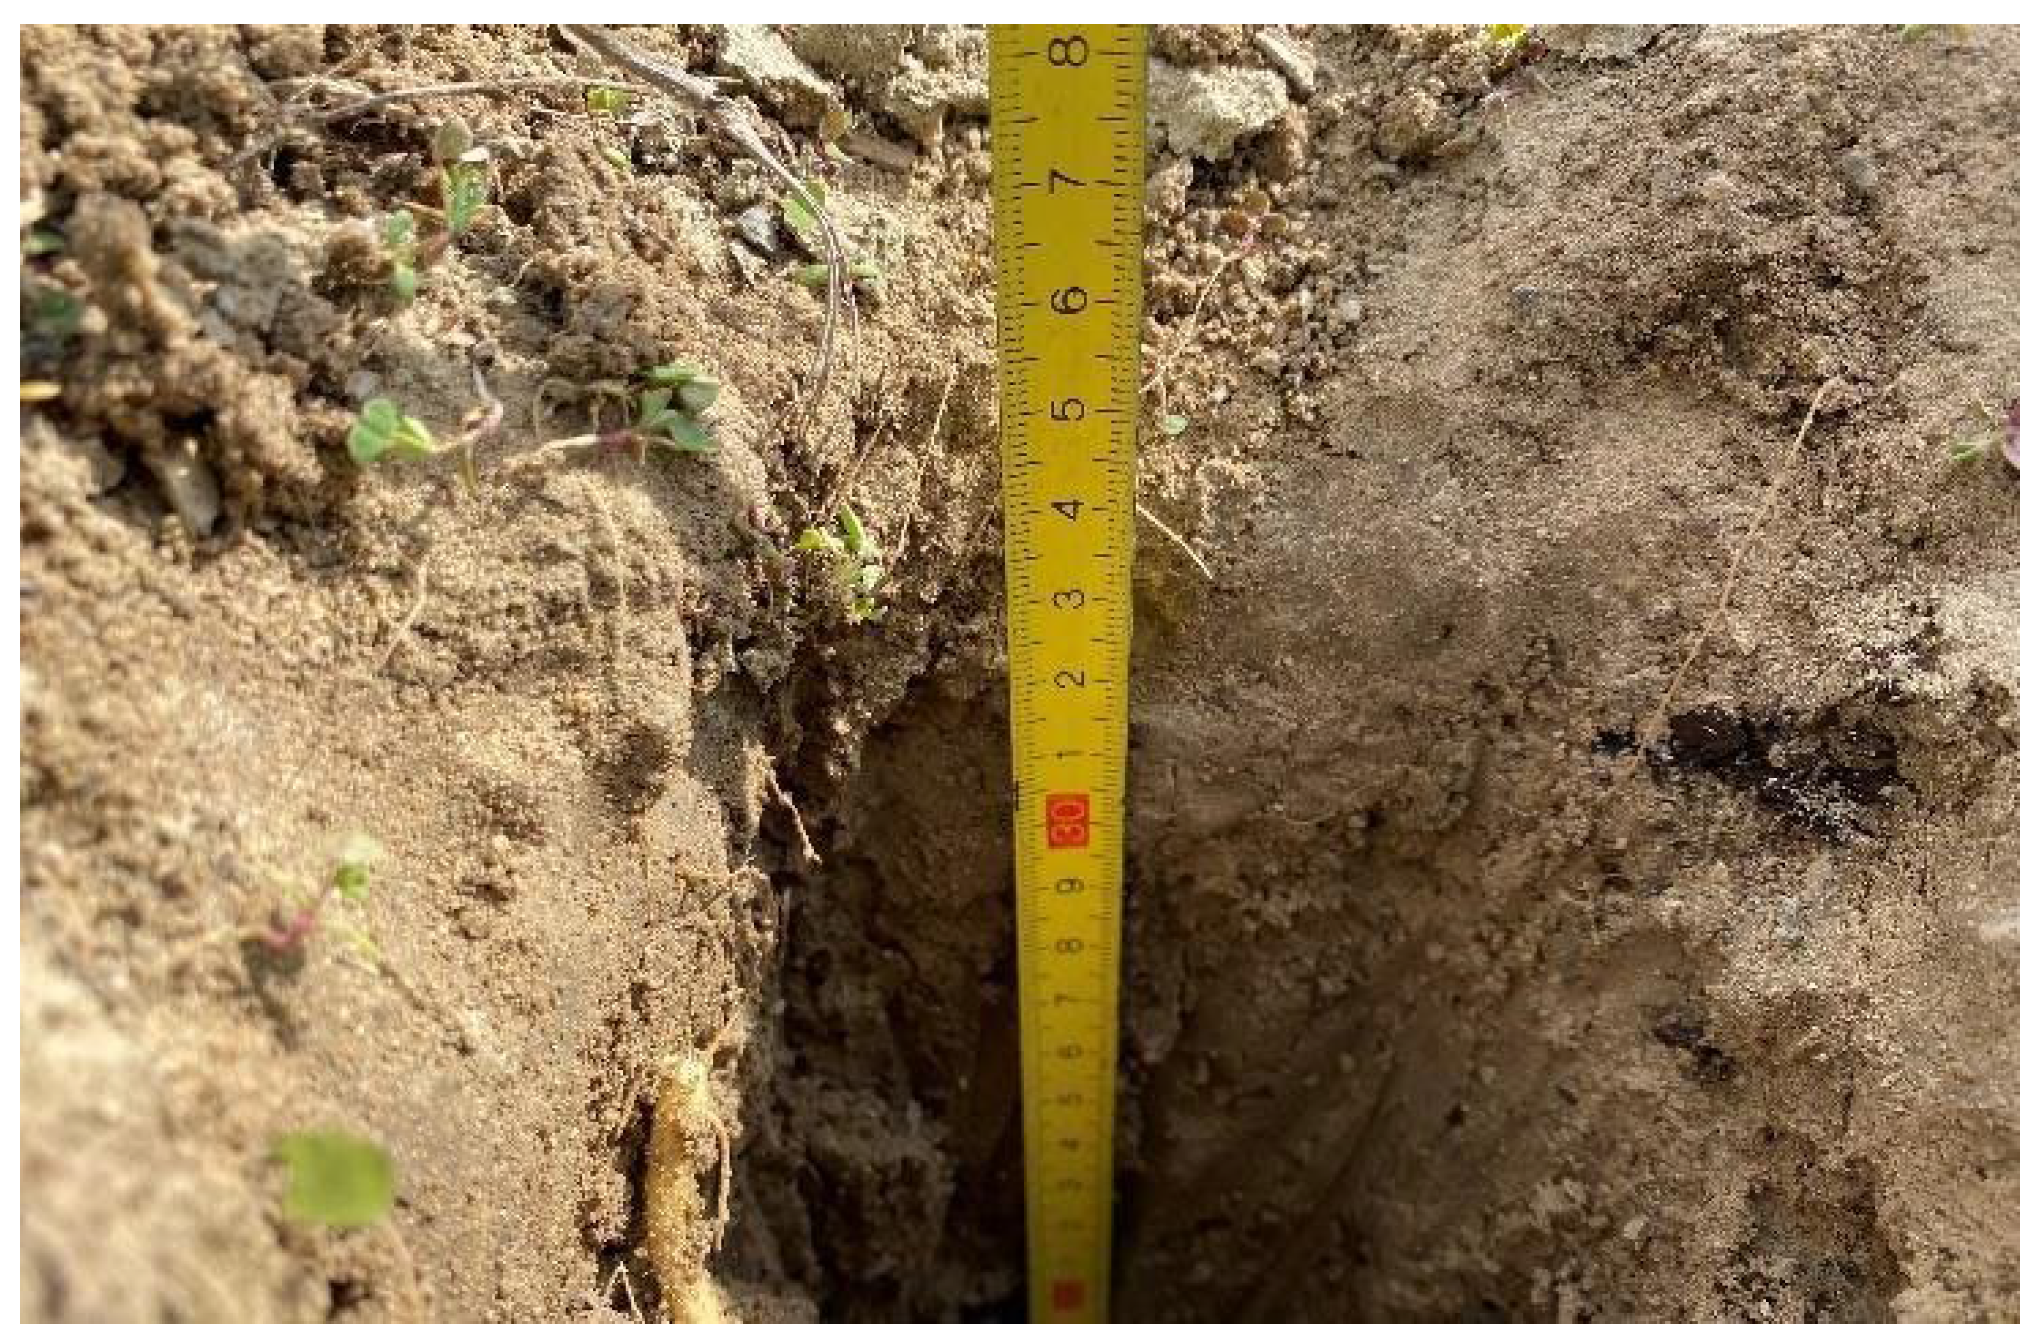 Soil can store gigatons of carbon, and Yard Stick wants to measure